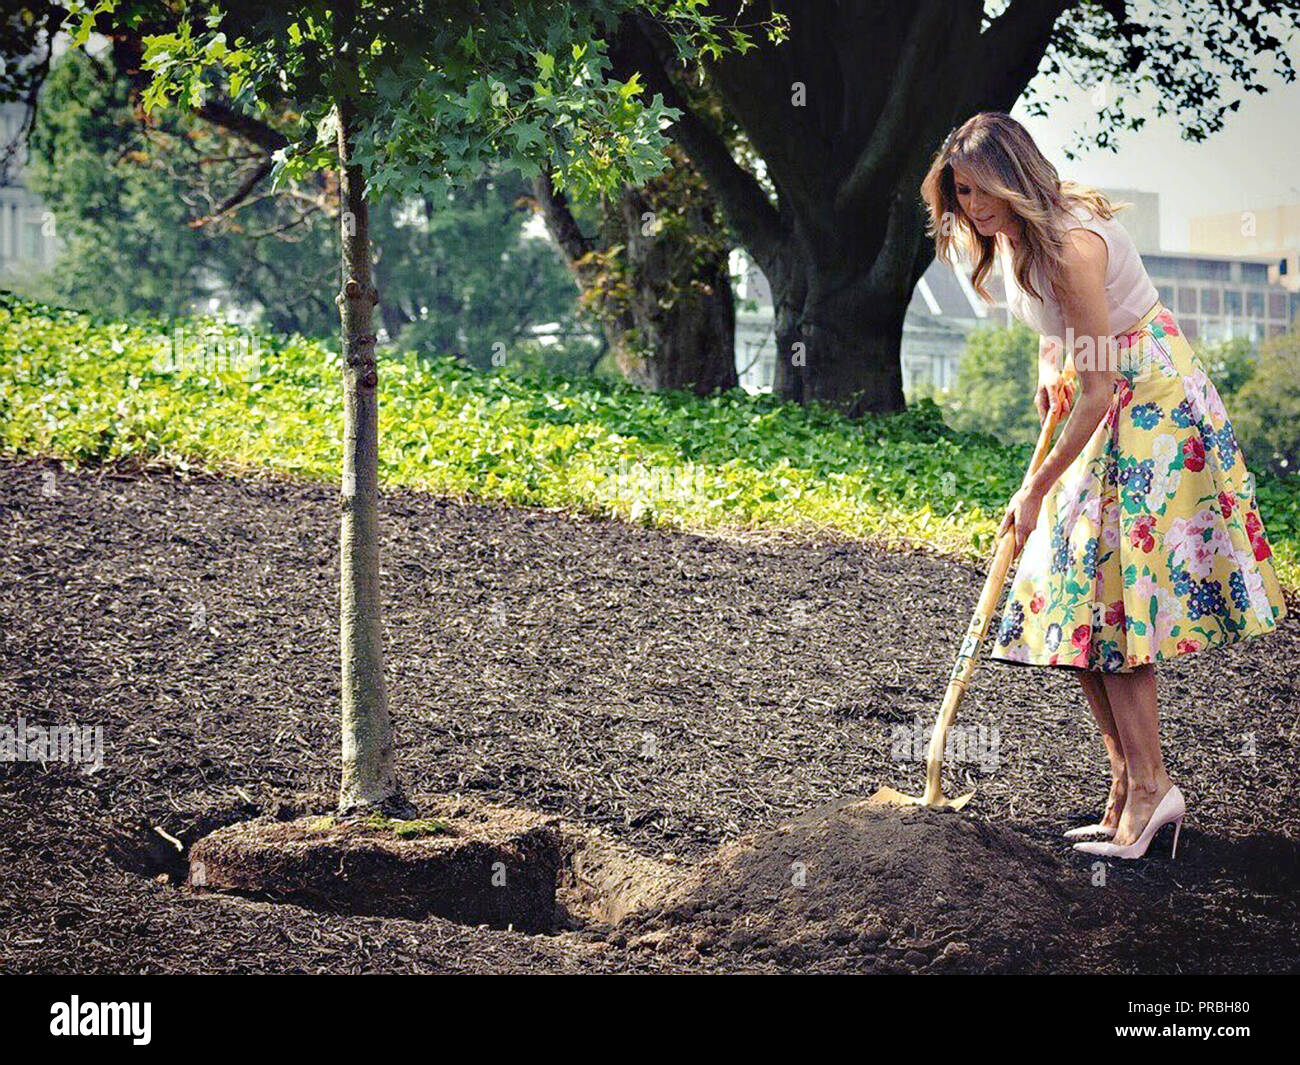 U.S First Lady Melania Trump, grabs a shovel of dirt as she participates in a tree planting wearing light pink Christian Louboutin stilettos on the South Lawn of the White House August 27, 2018 in Washington, DC. The sapling replaces a tree which blew down during a windstorm earlier this year. Stock Photo